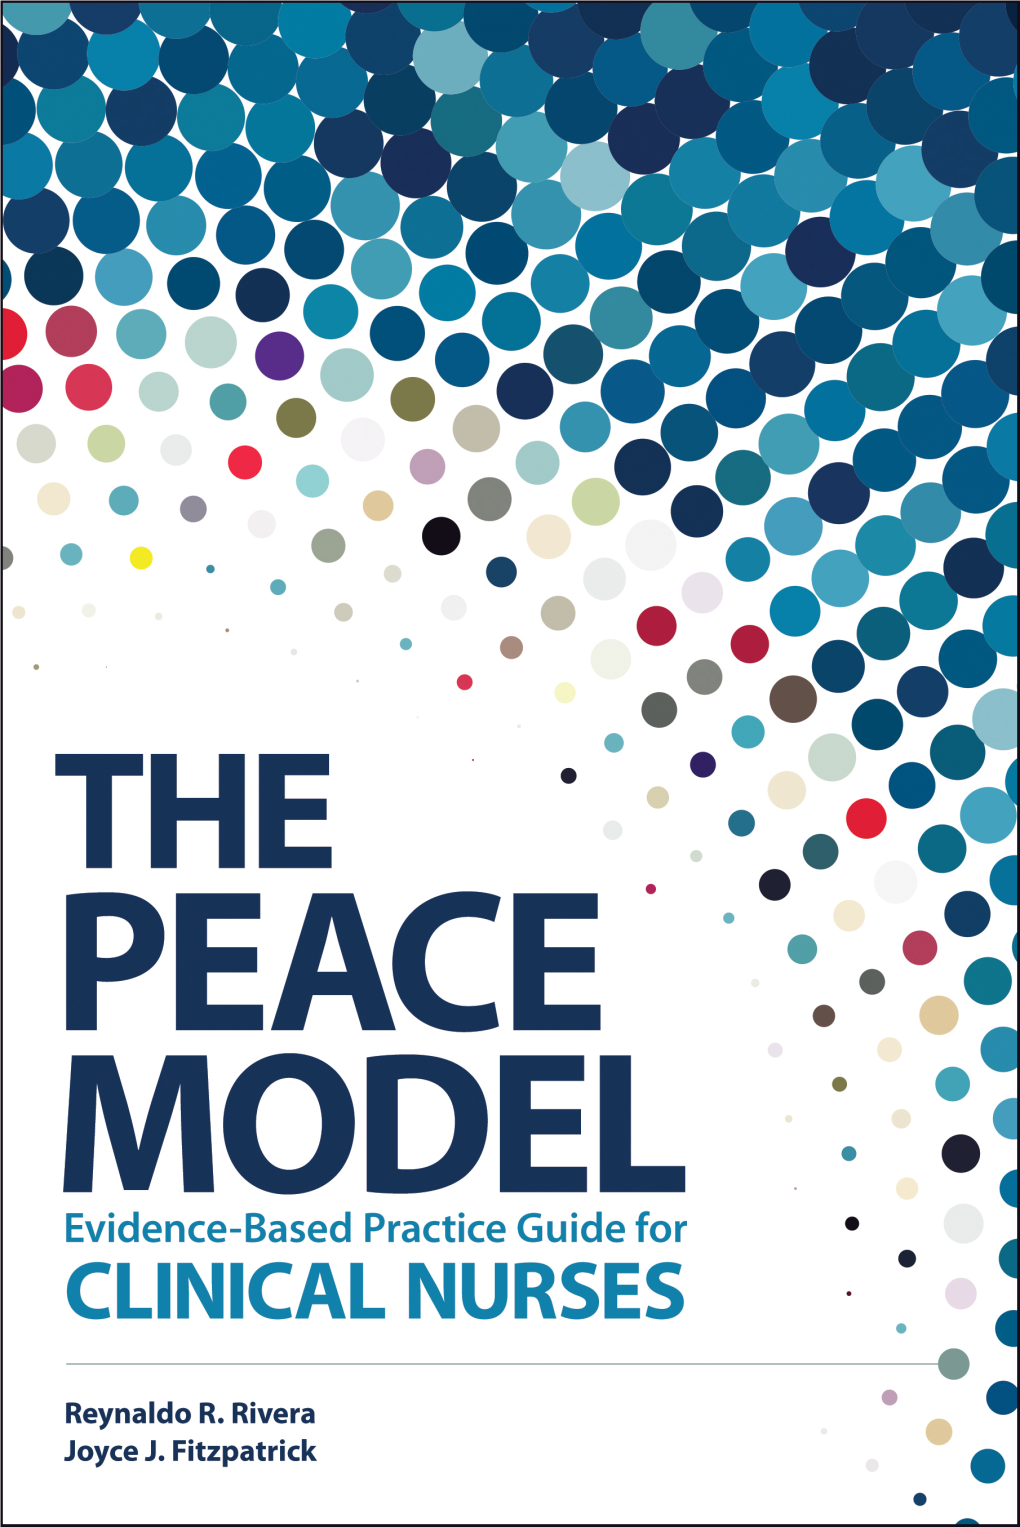 The PEACE Model: Evidence-Based Practice Guide for Clinical Nurses, Authors Reynaldo R